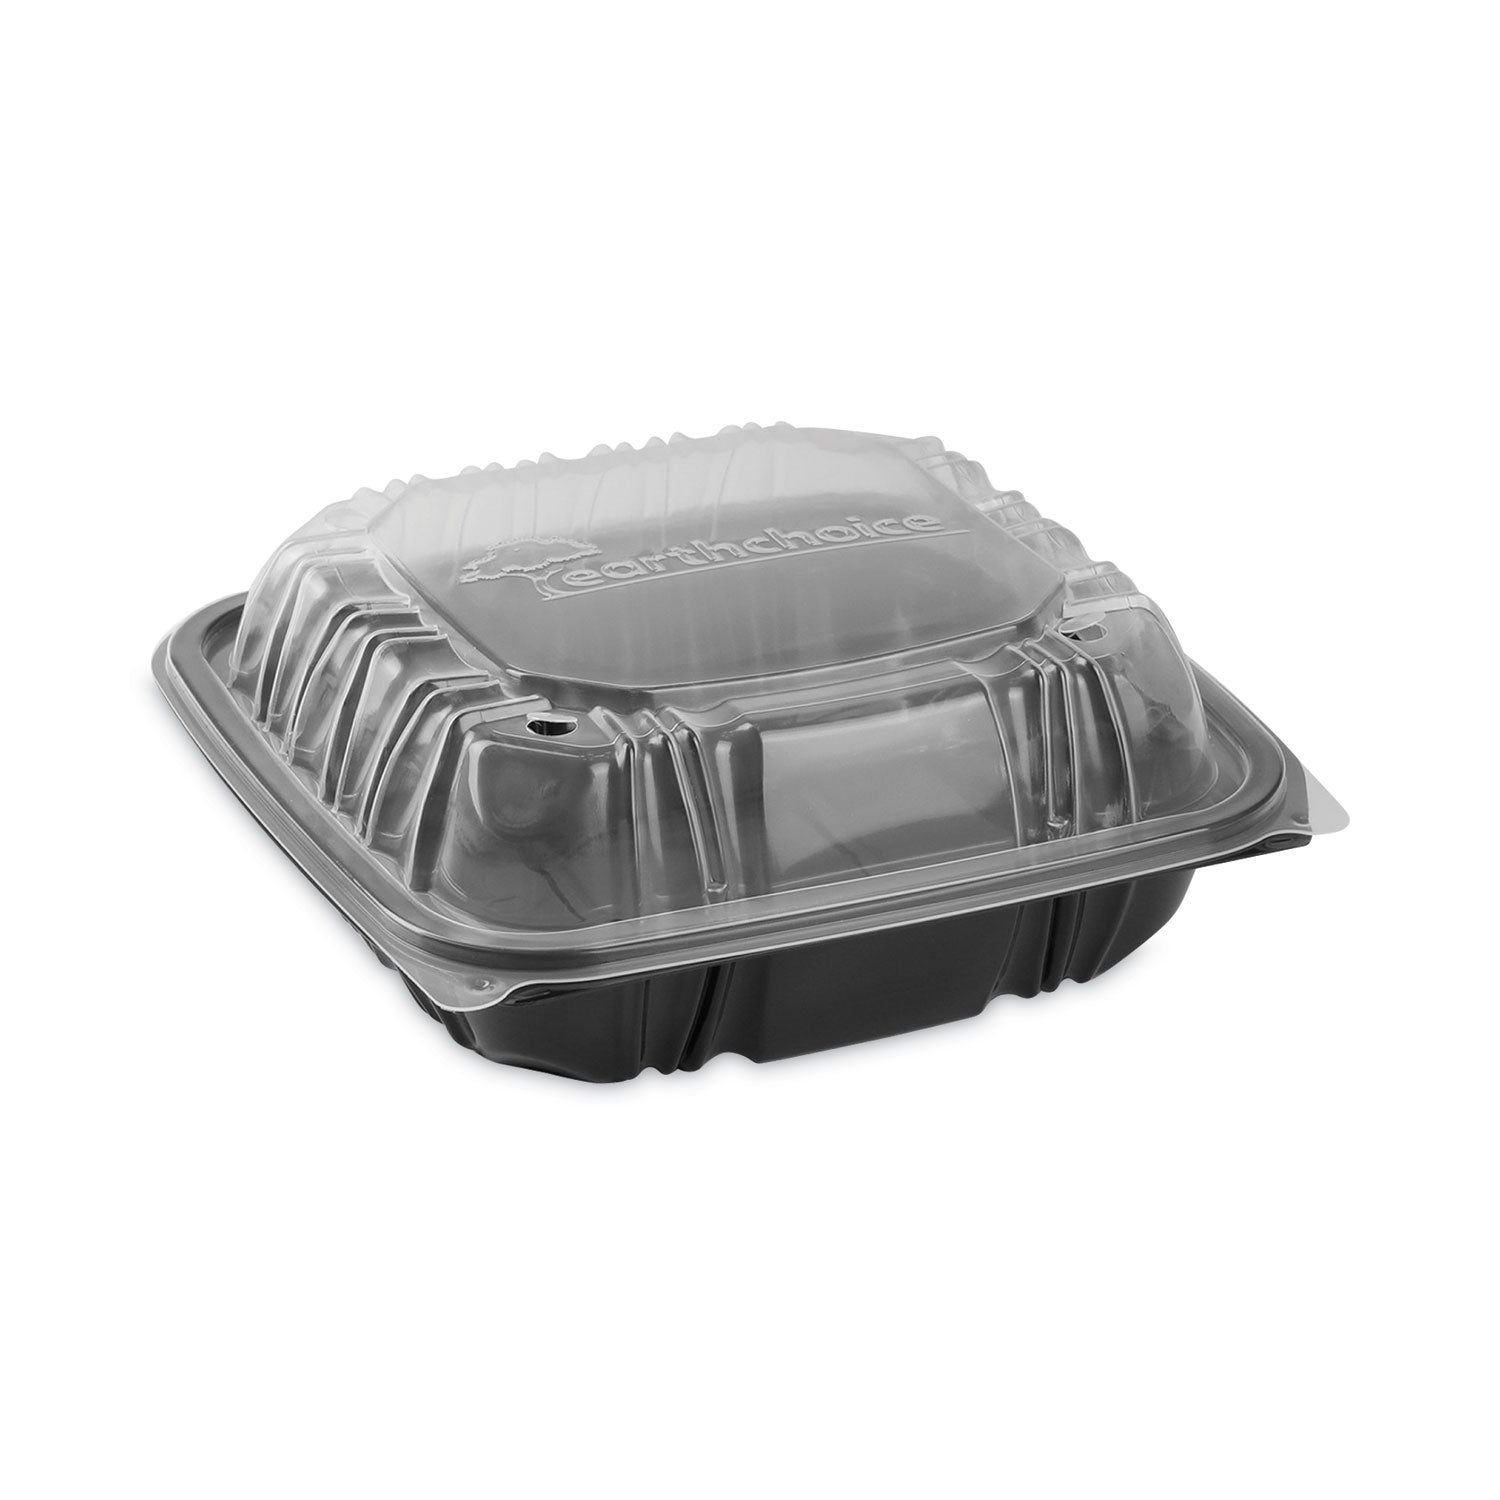 earthchoice-vented-dual-color-microwavable-hinged-lid-container-1-compartment-28oz-75x75x3-black-clear-plastic-150-ct_pctdc757100b000 - 1